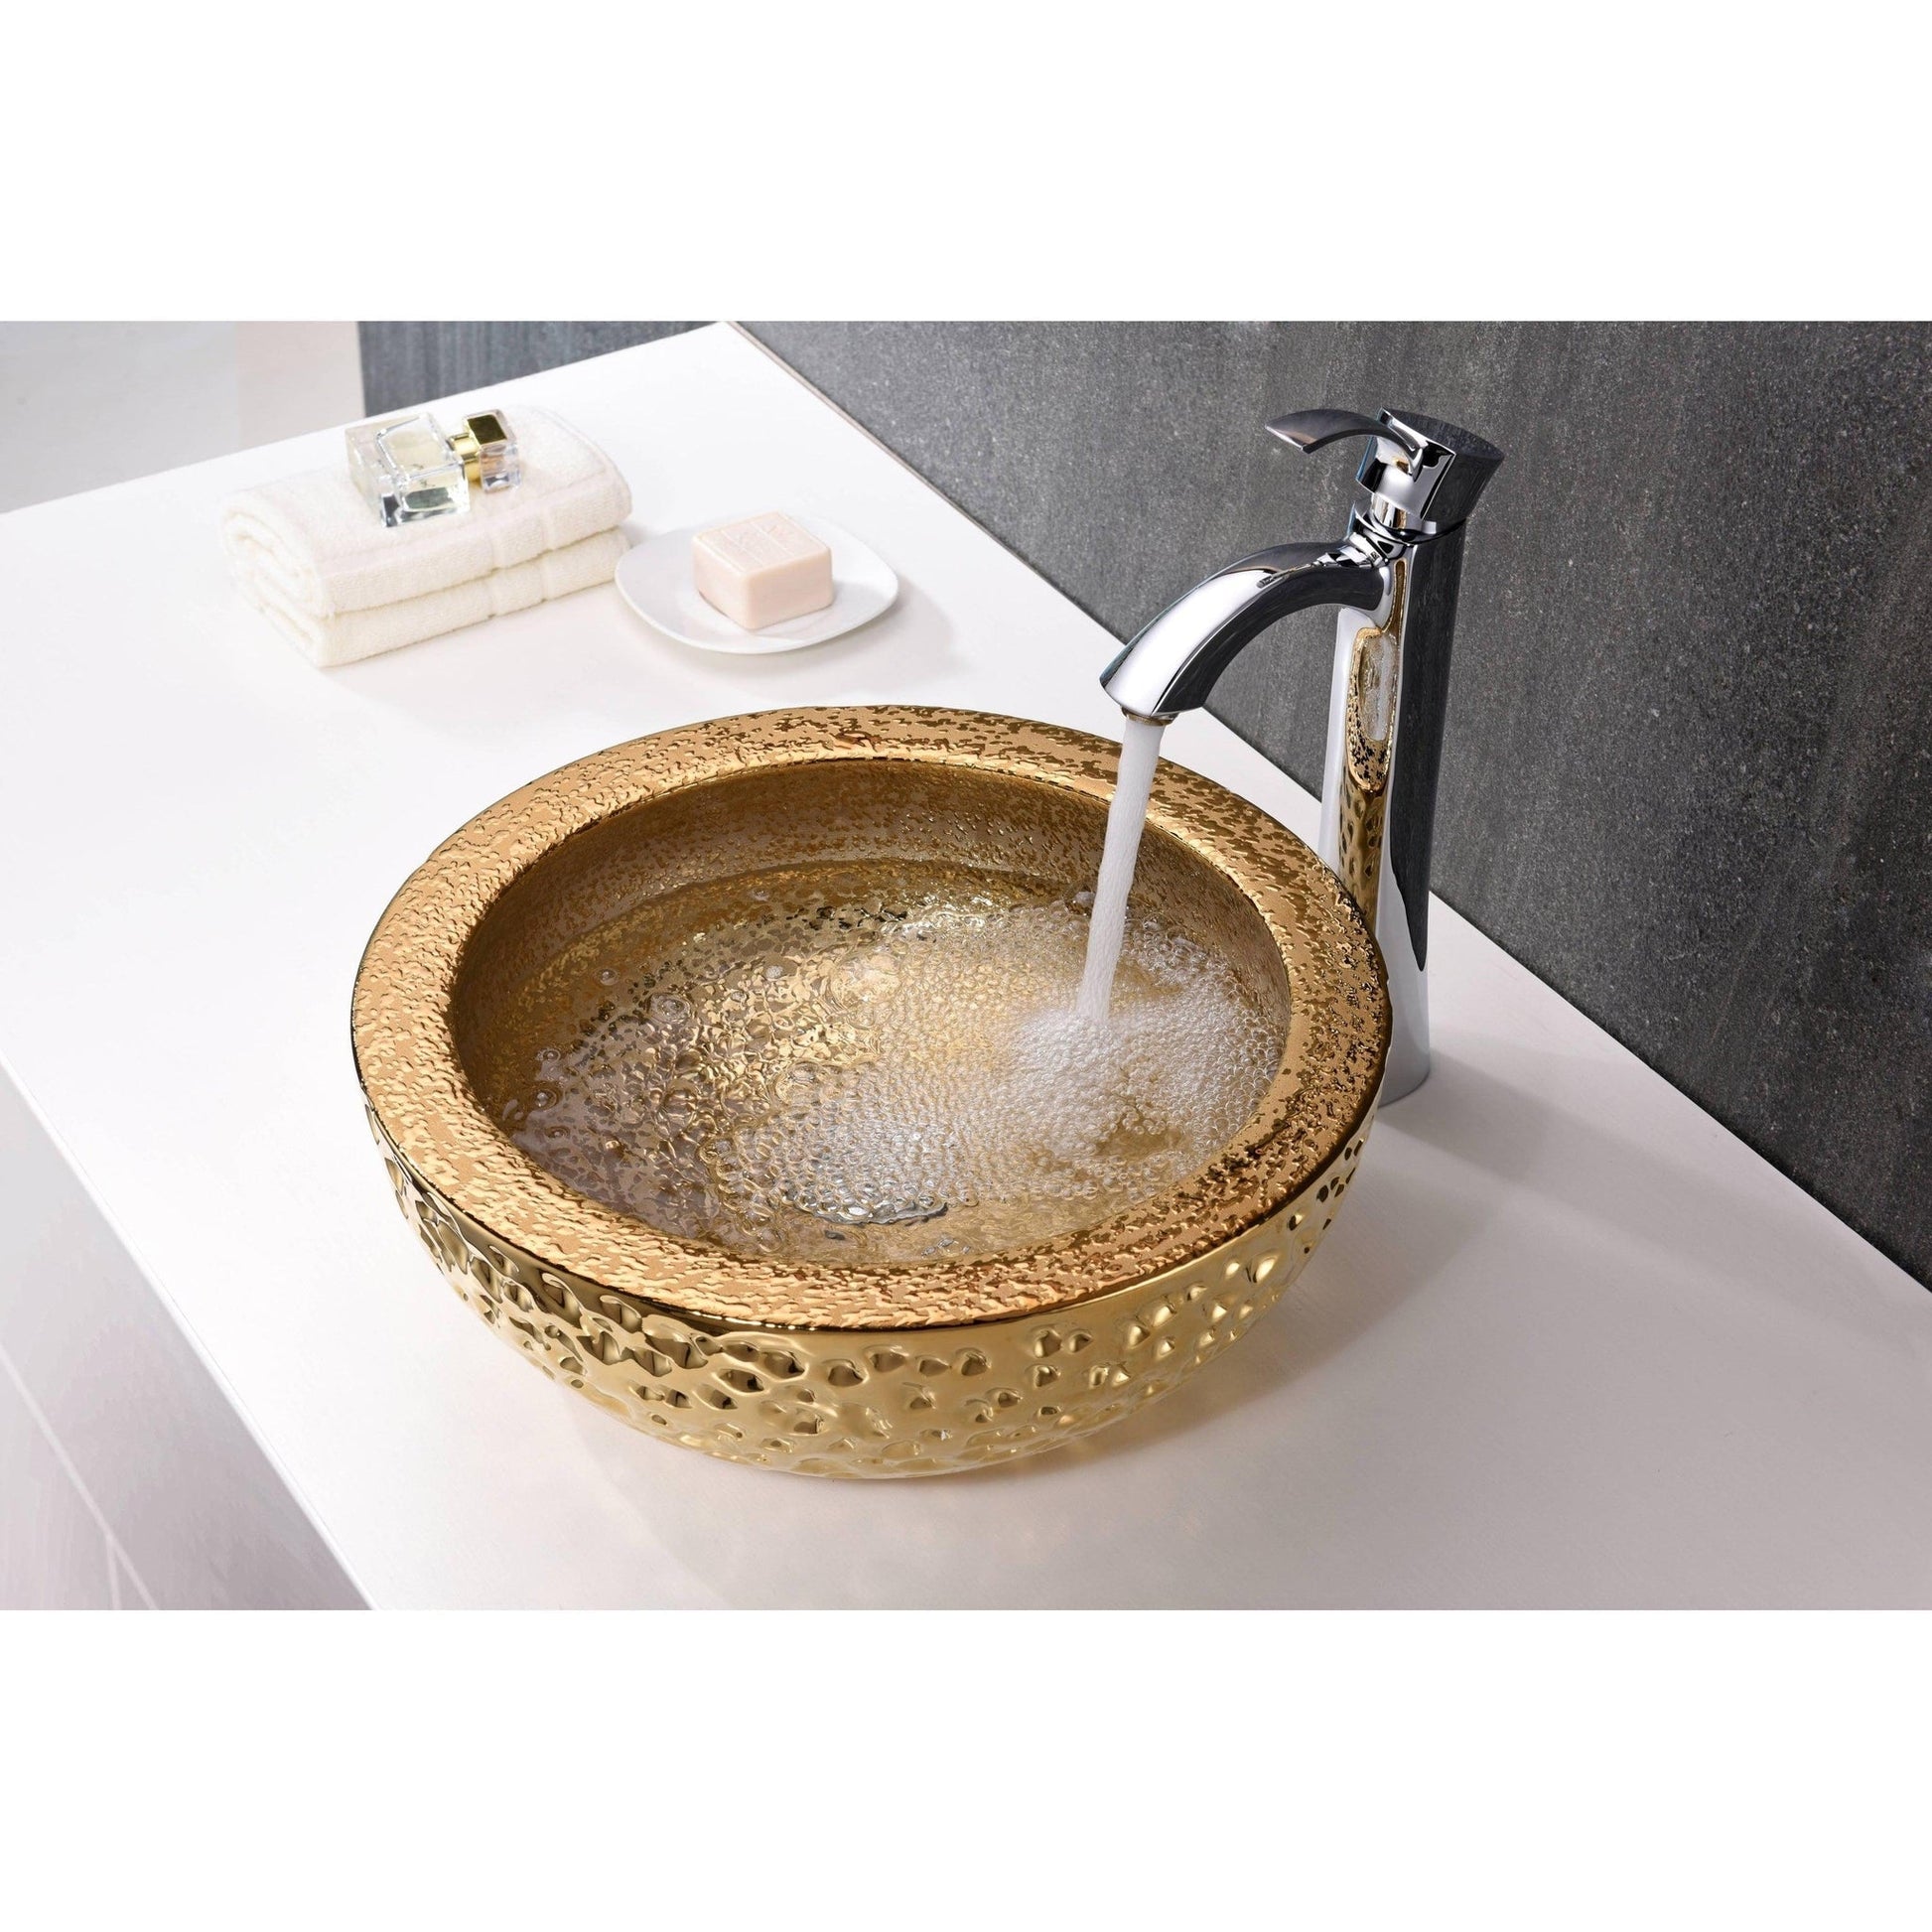 ANZZI Regalia Series 17" x 17" Round Speckled Gold Deco-Glass Vessel Sink With Polished Chrome Pop-Up Drain